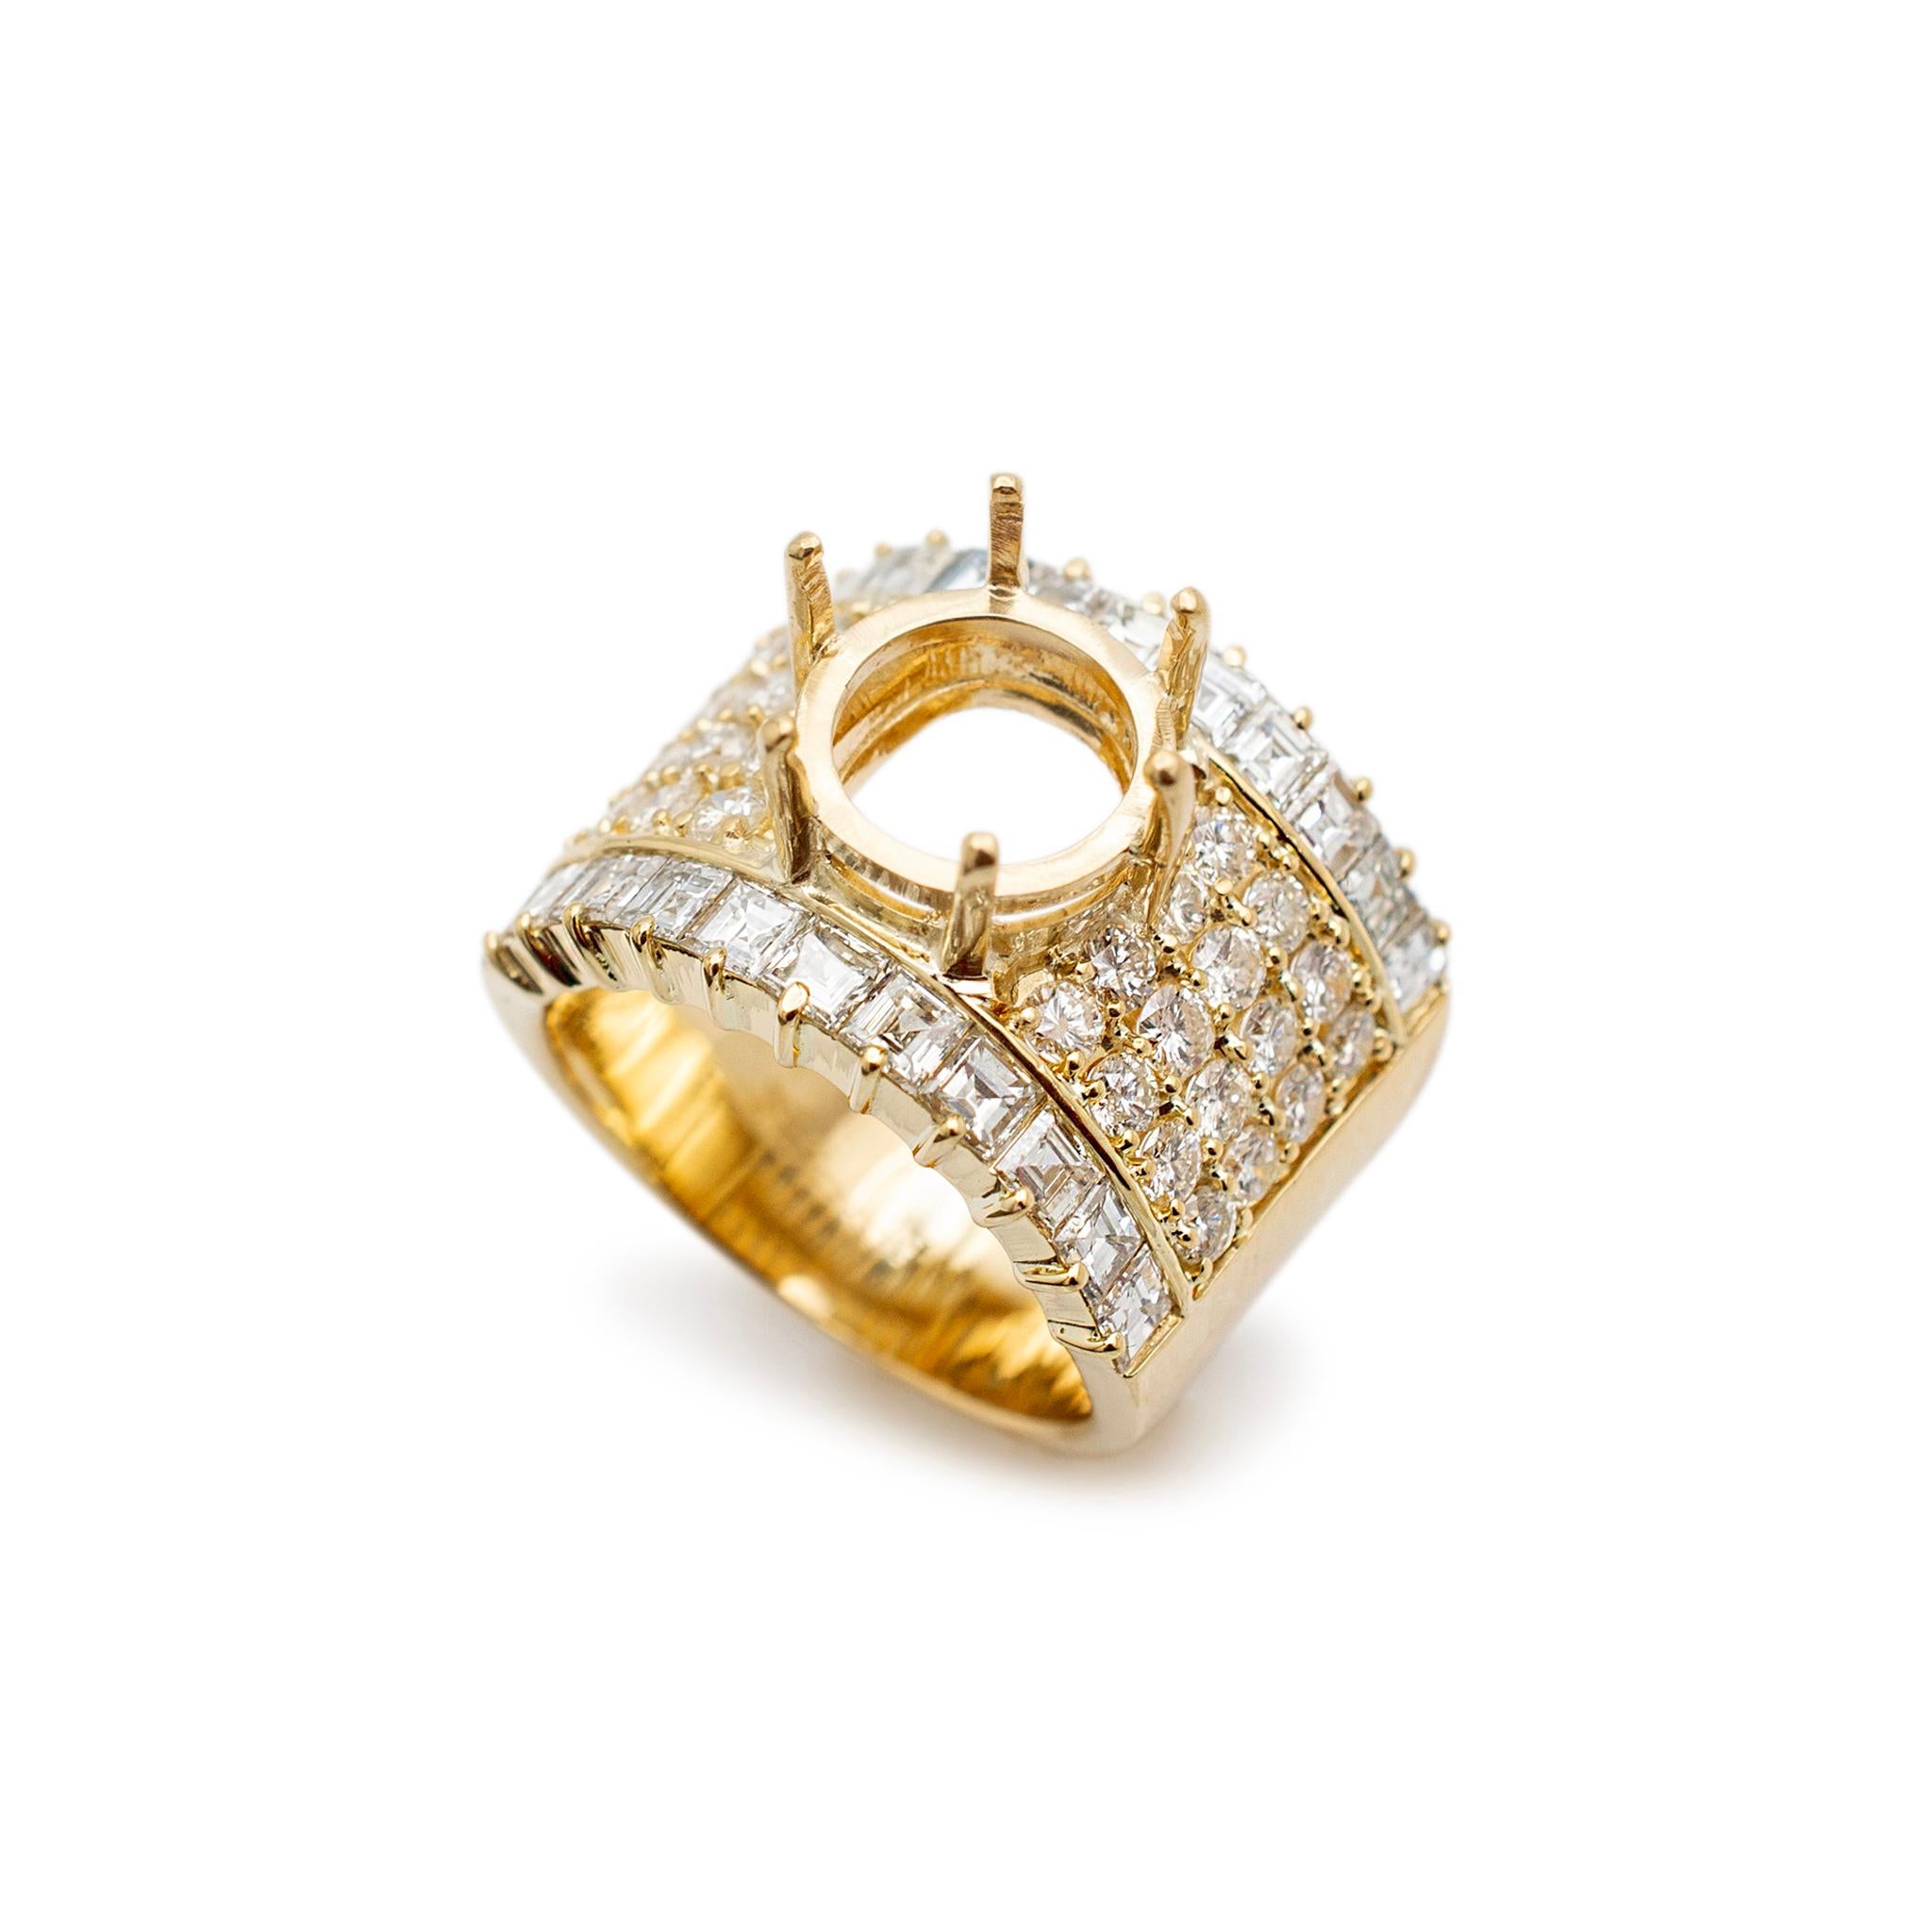 Metal Type: 18K Yellow Gold

Ring Size: 8

Width: 17.50 mm tapering to 9.45 mm

Weight: 17.25 grams

Diamond semi-mount ring with a tapered, comfort-fit shank. The metal was tested and determined to be 18K yellow gold. Engraved with 